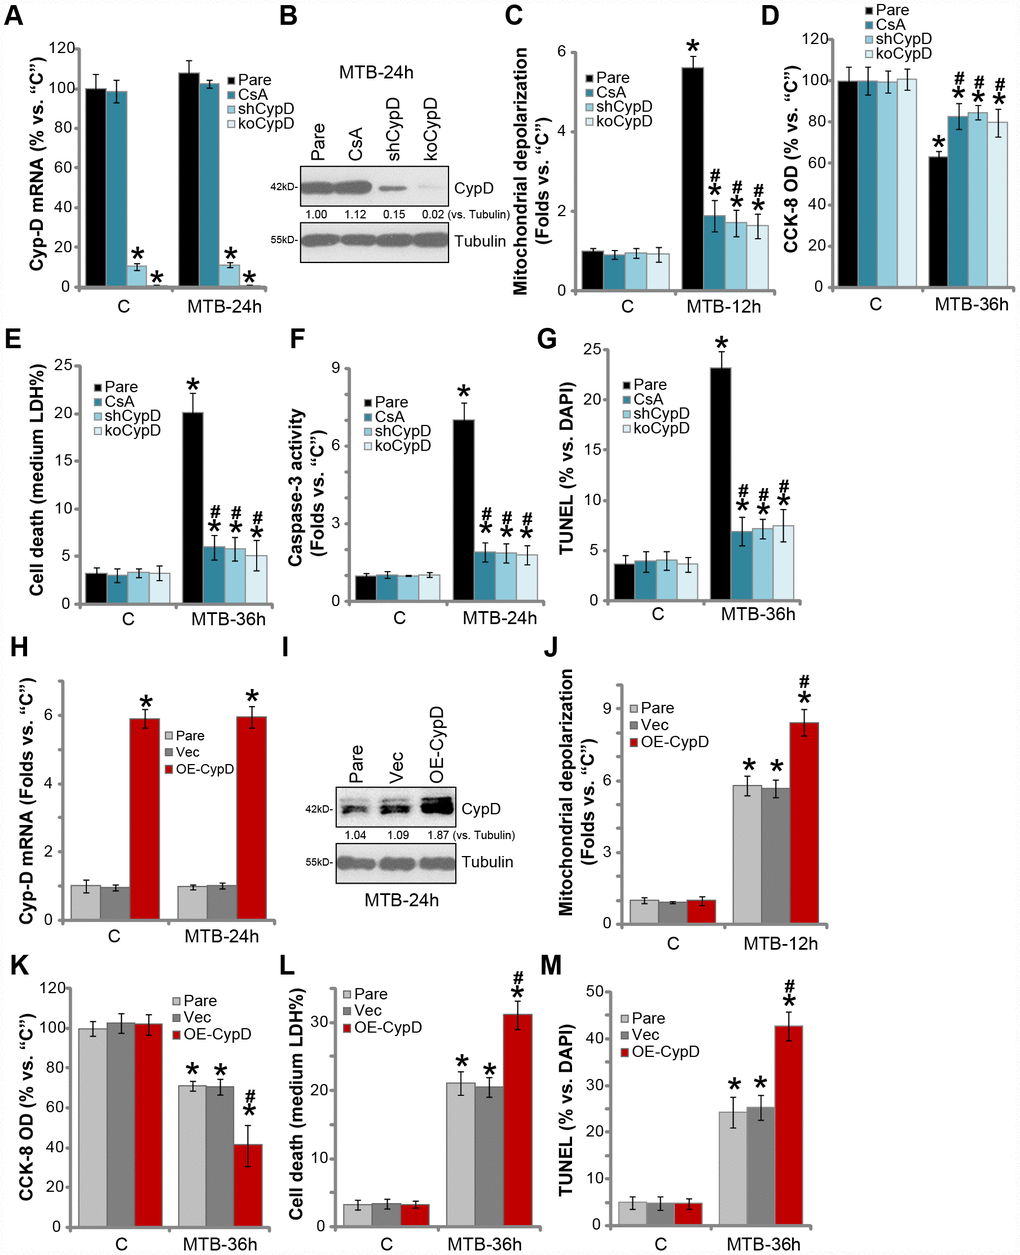 CypD inhibition attenuates programmed necrosis and apoptosis in MTB-infected human macrophages. The parental control human macrophages (“Pare”), with or without cyclosporin A (CsA) pretreatment (5 μM, for 1h), as well as the stale macrophages with the CypD shRNA (“shCypD”) or the lenti-CRISPR-Cas9 CypD knockout construct (“koCypD”), were infected with Mycobacterium tuberculosis (MTB) for applied time periods, CypD mRNA (A) and protein (B) expression was shown; Mitochondrial depolarization, cell viability, cell necrosis and apoptosis were tested by JC-1 staining (C), CCK-8 (D), medium LDH release (E), and Caspase-3/TUNEL assays (F and G) assays, respectively. The parental control human macrophages (“Pare”) as well as the stable macrophages with the CypD-expression construct (“OE-CypD”) or the empty vector (“Vec”) were infected with MTB for applied time periods, CypD mRNA (H) and protein (I) expression was shown; Mitochondrial depolarization (J), cell viability (K) and cell necrosis (L) were tested similarly. CypD expression was quantified, normalized to Tubulin (B and I). Data were presented as mean ± SD (n=5), and results were normalized to “C”. * P #P 